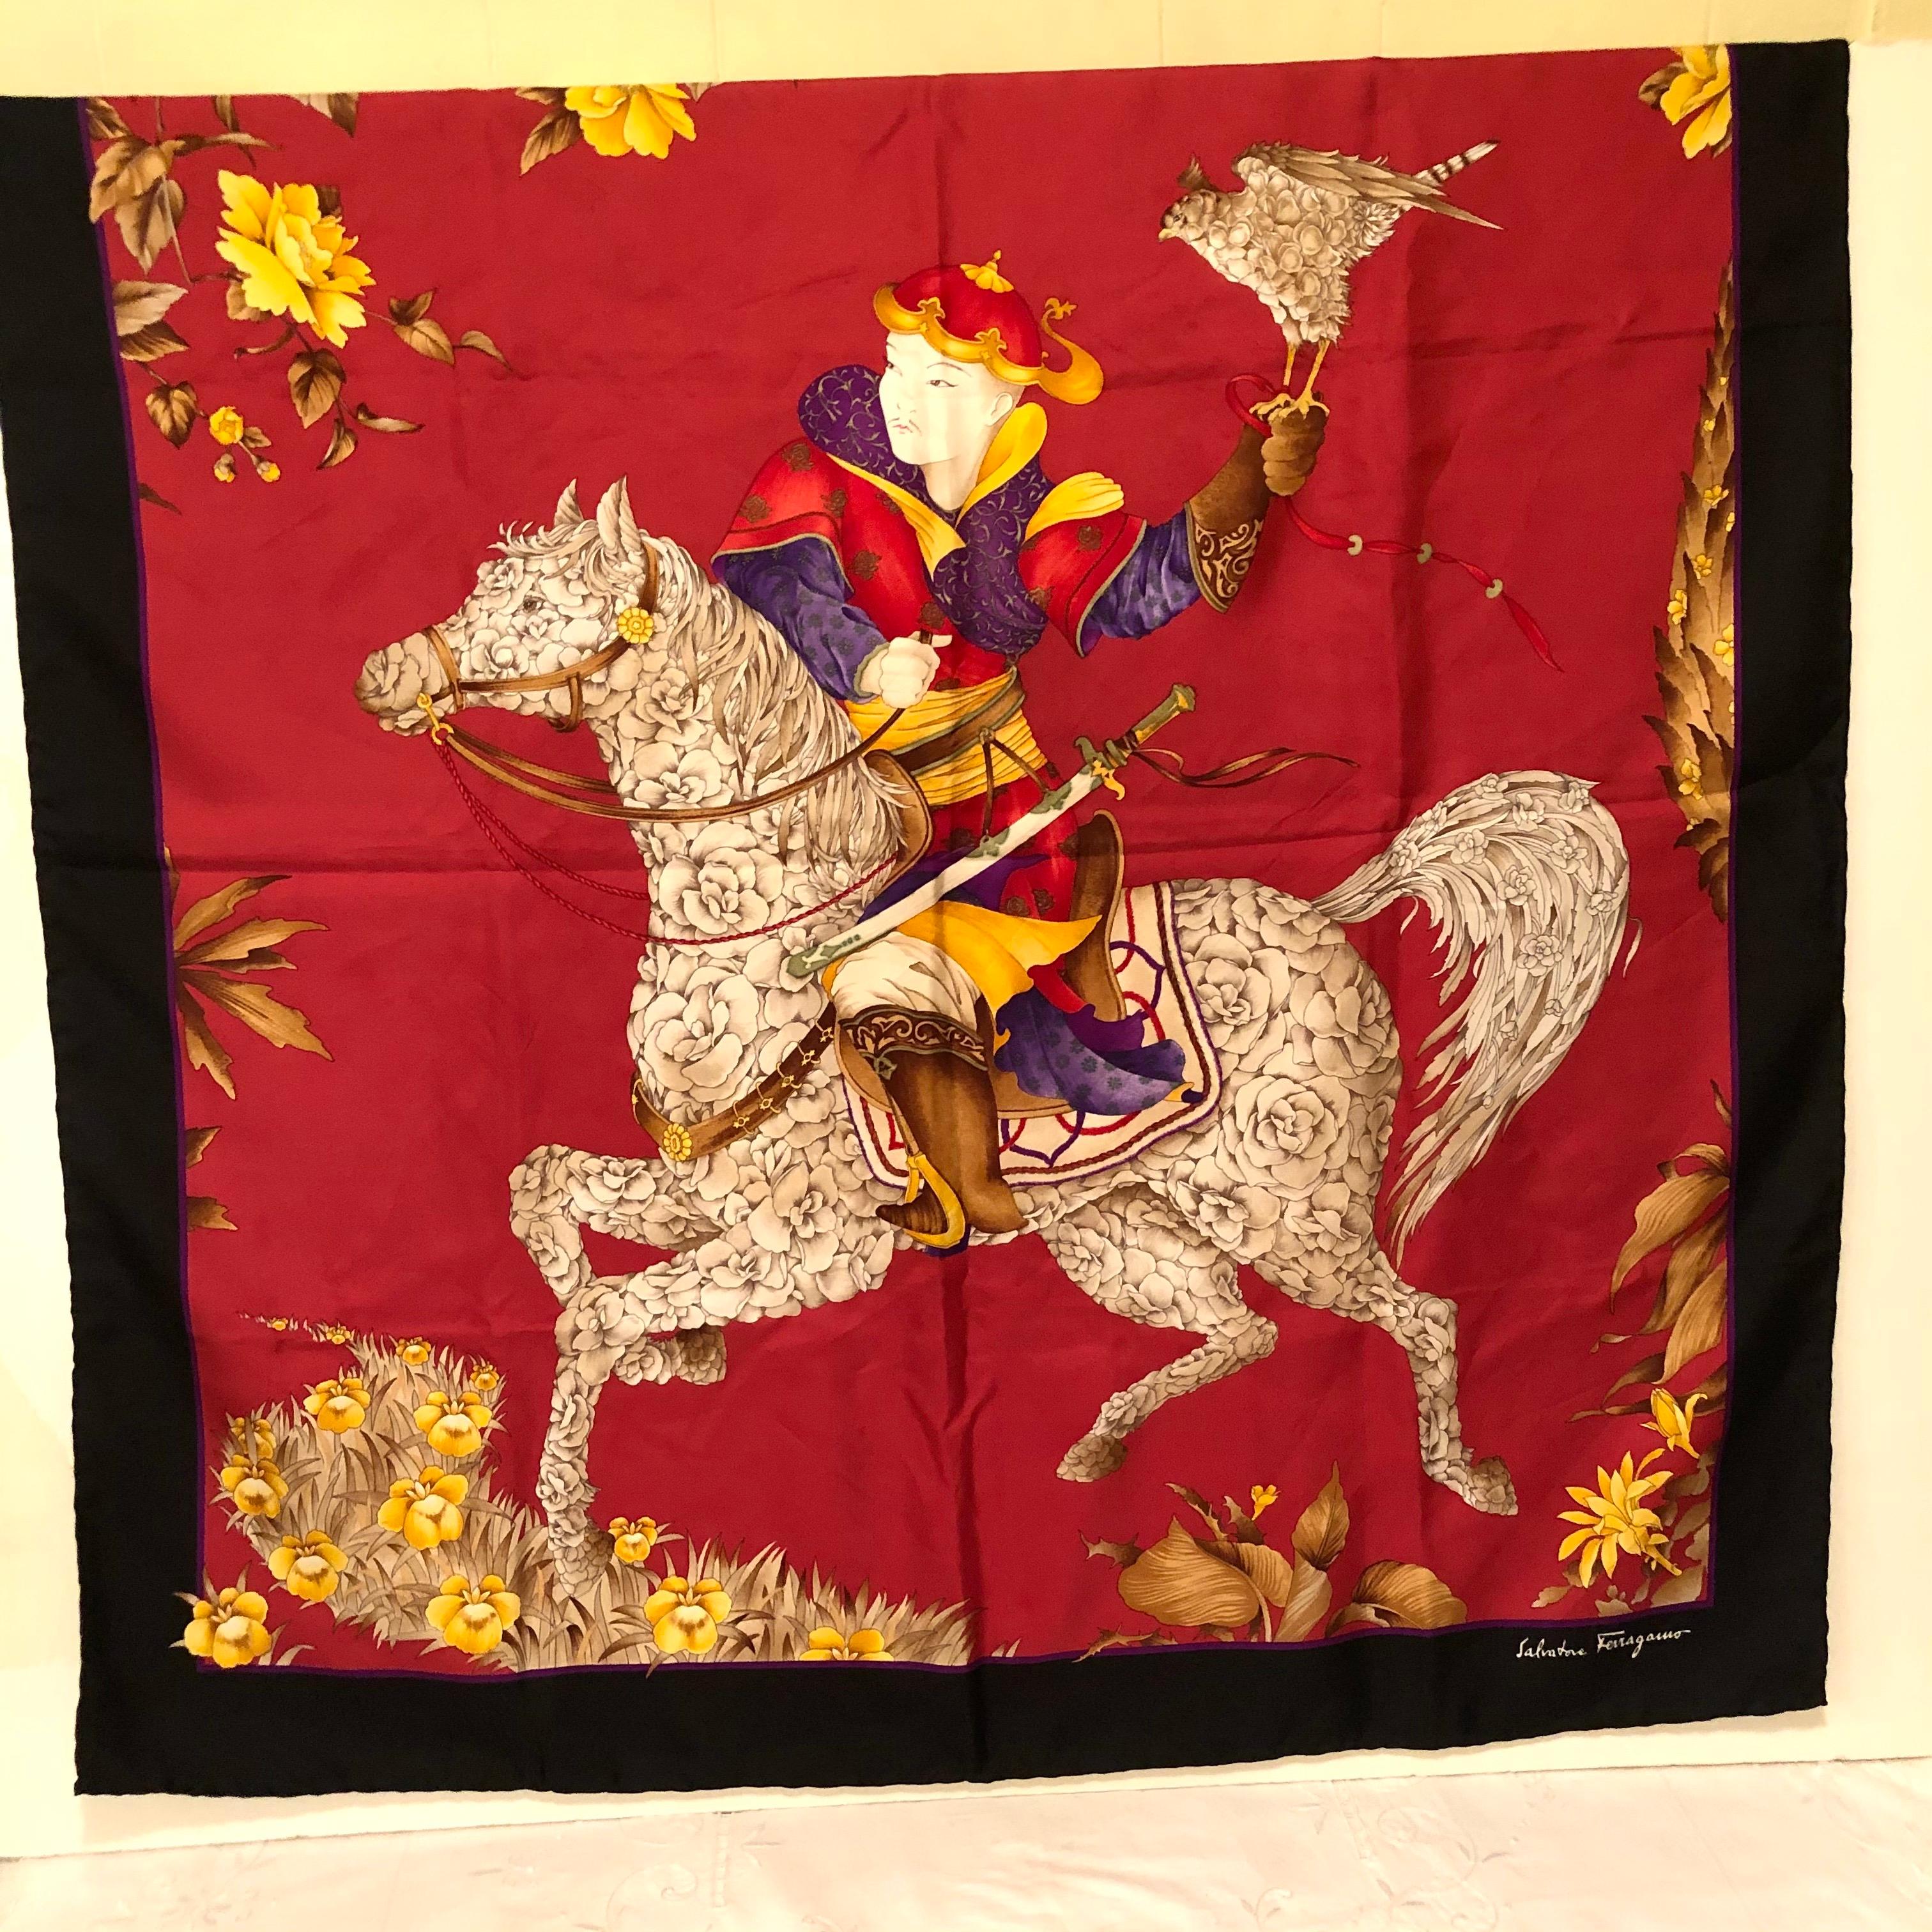 Italian Salvatore Ferragamo Red Silk Scarf with a Stunning Design of a Man on a Horse